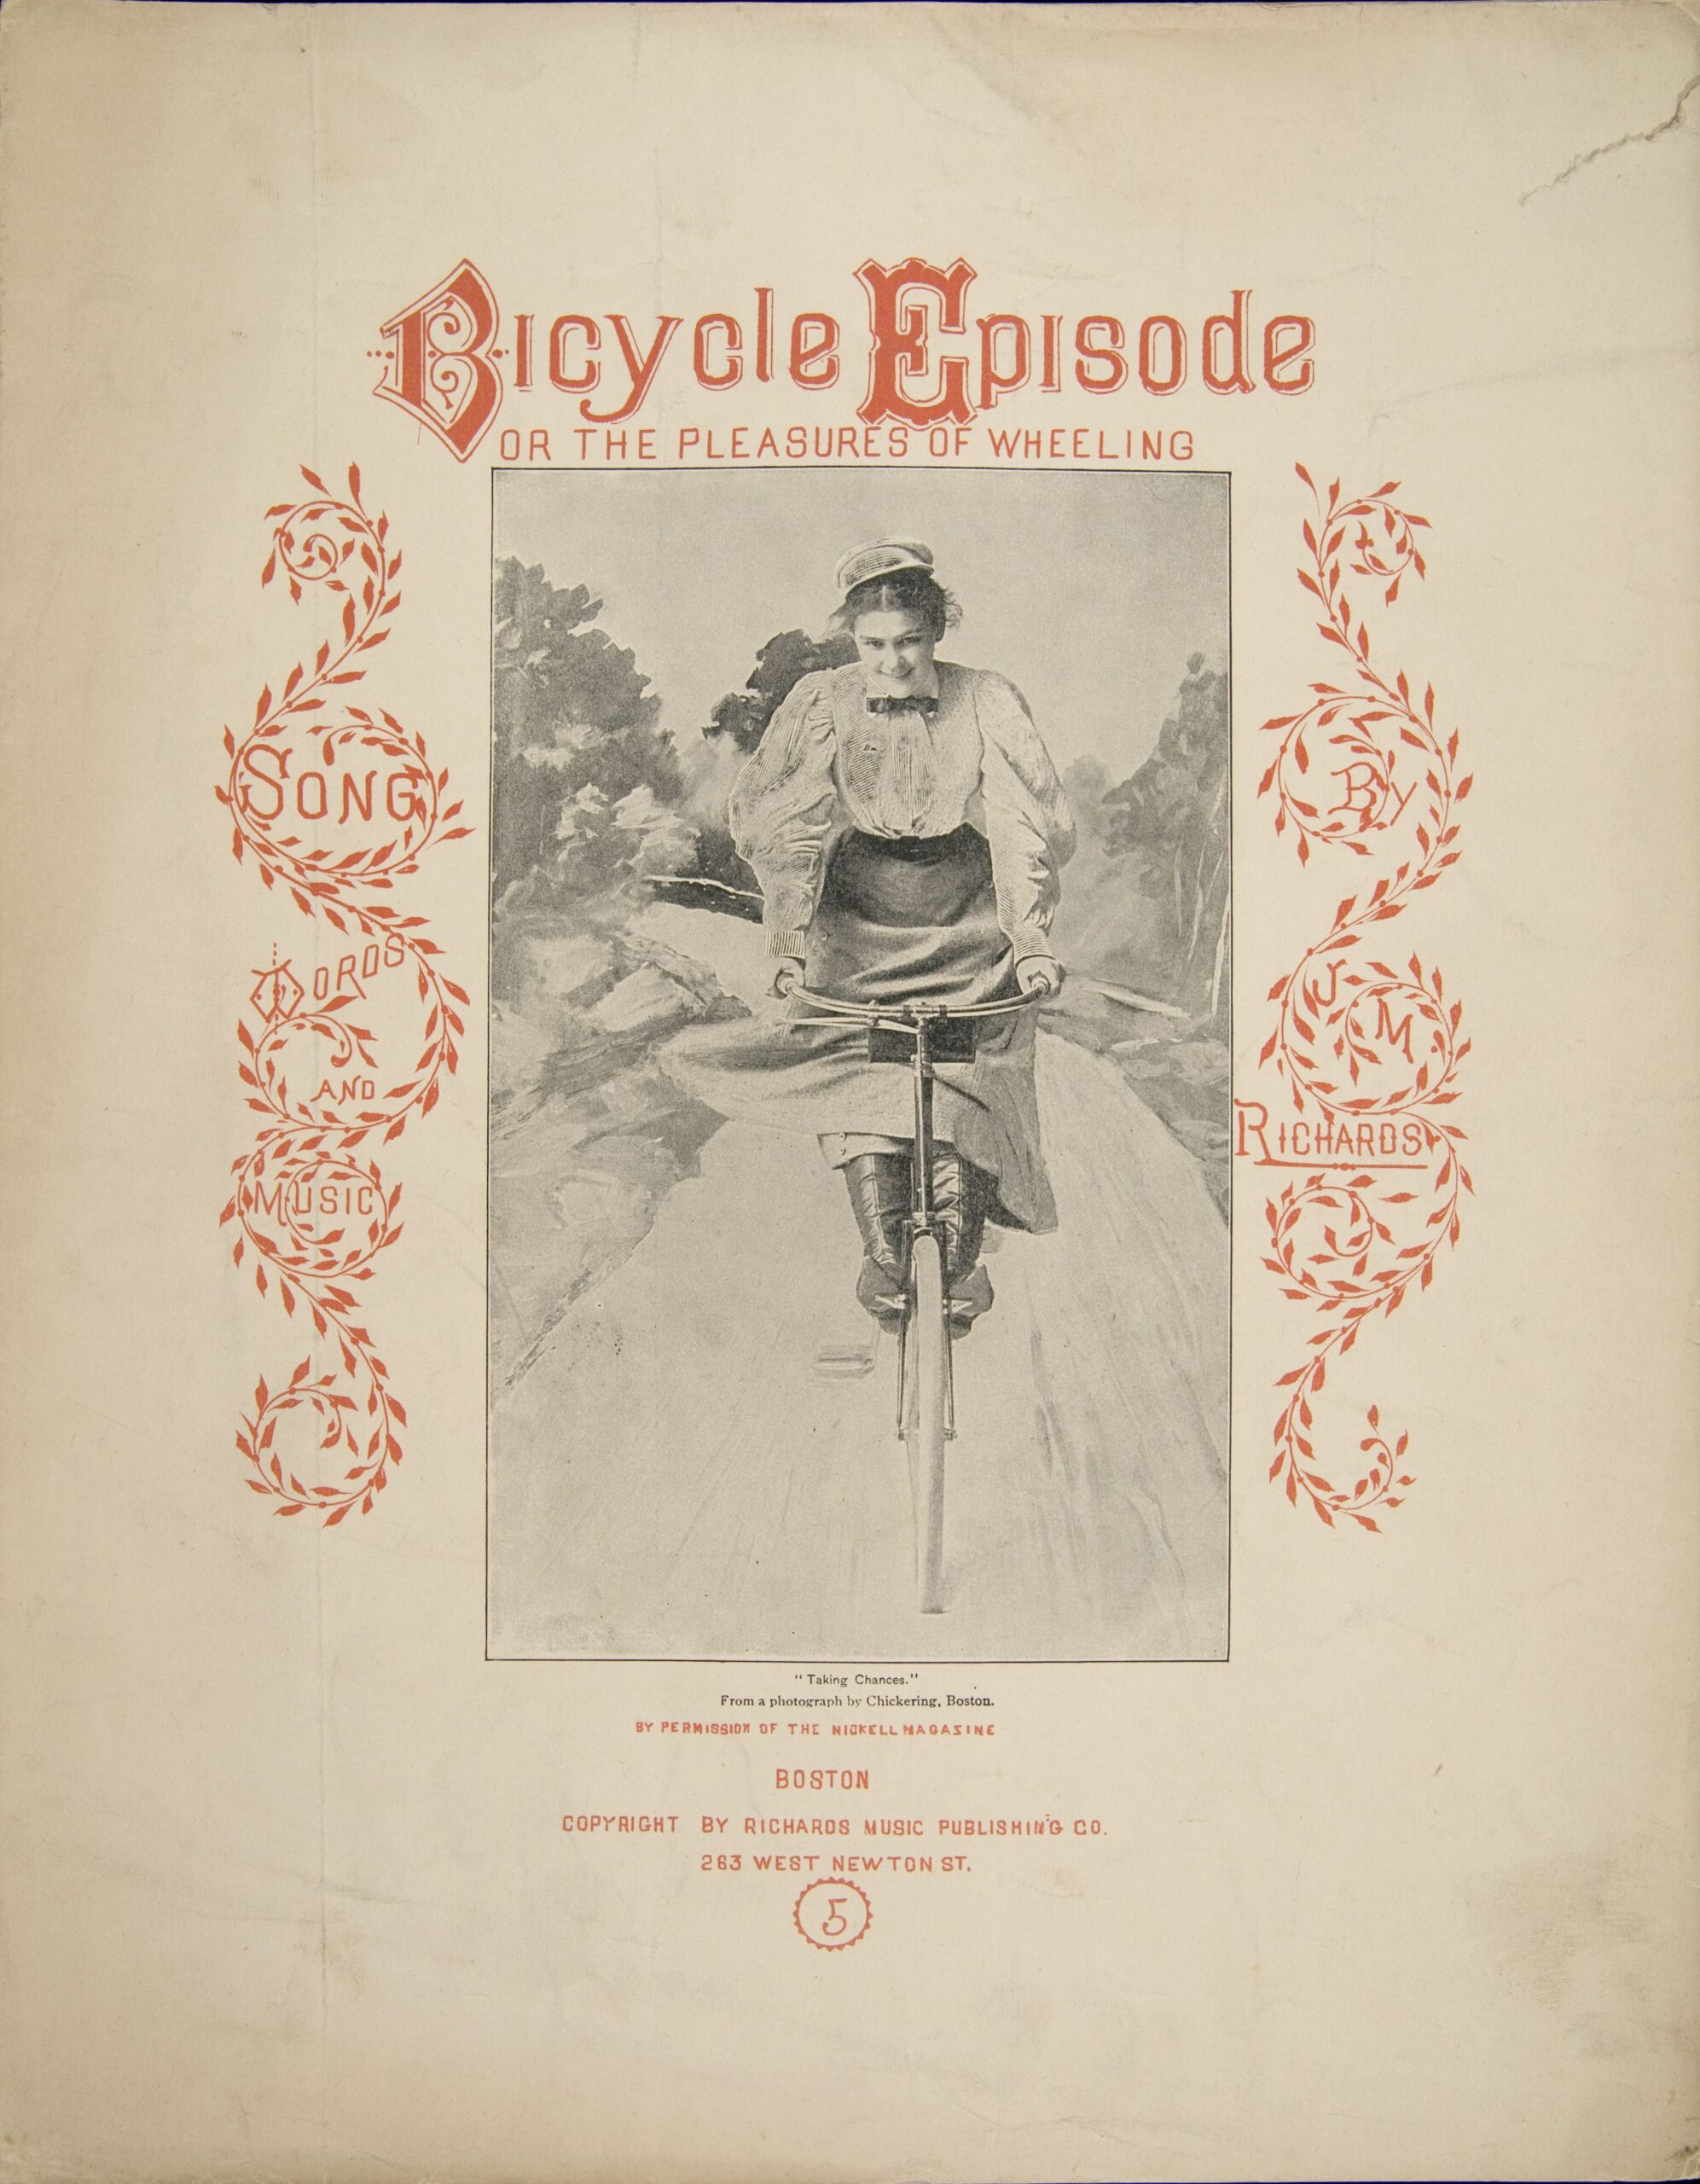 Cover page of a songbook, depicting a young woman in turn of the century garb riding a bicycle. Text: "Bicycle Episode or the Pleasures of Wheeling."